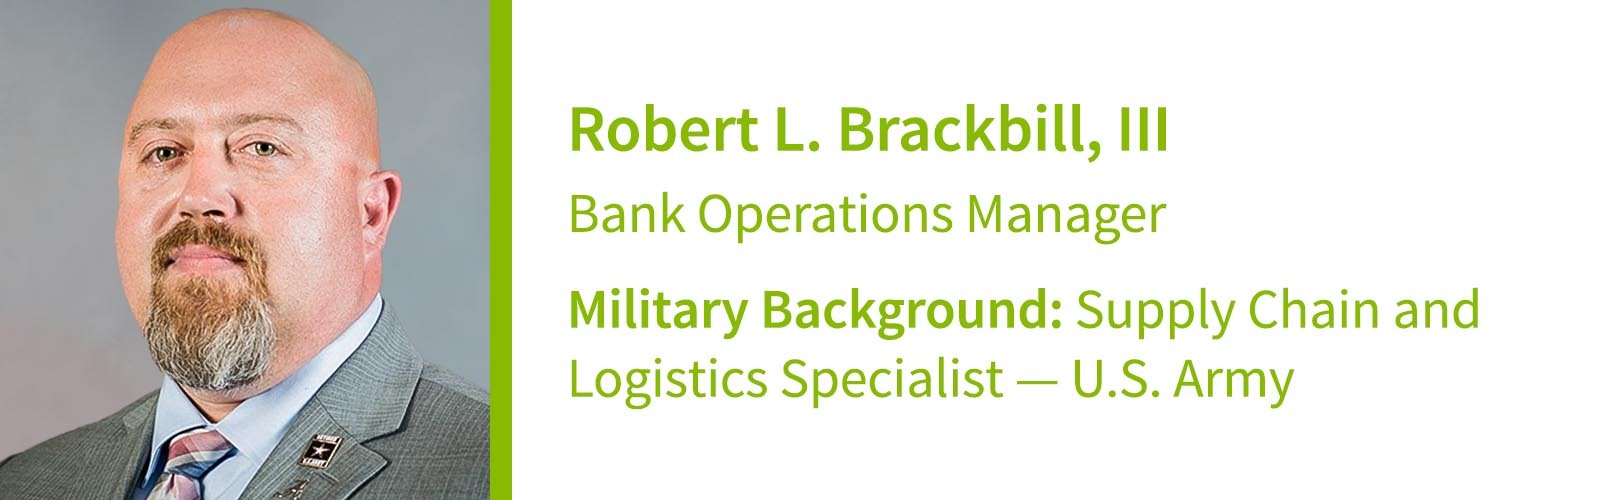 Robert L. Brackbill, III, Bank Operations Manager Military Background: Supply Chain and Logistics Specialist — U.S. Army